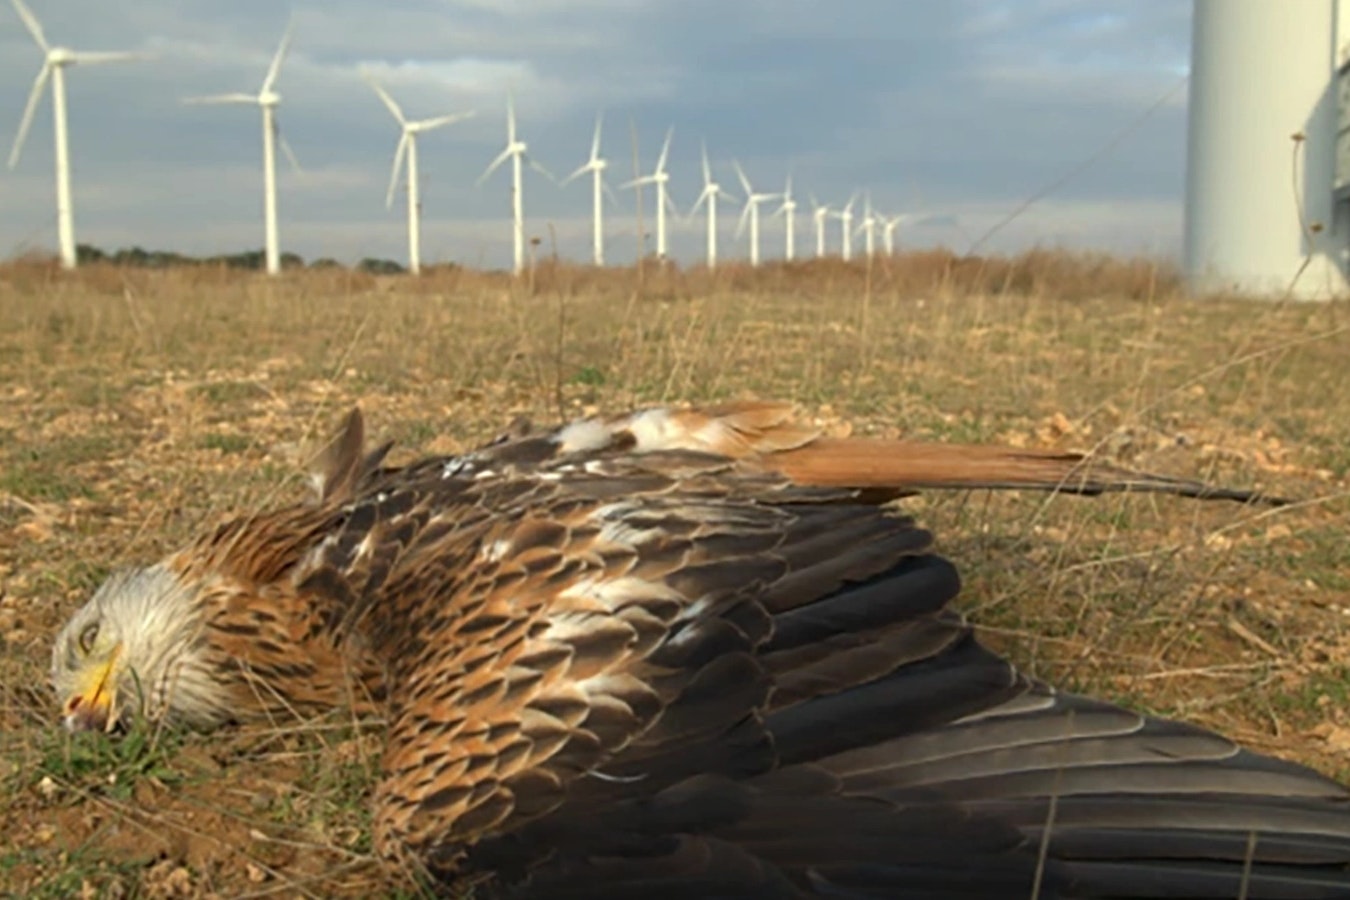 A California long-range hunter says wind turbines can be so deadly he calls them "Cuisinart mixers for birds."